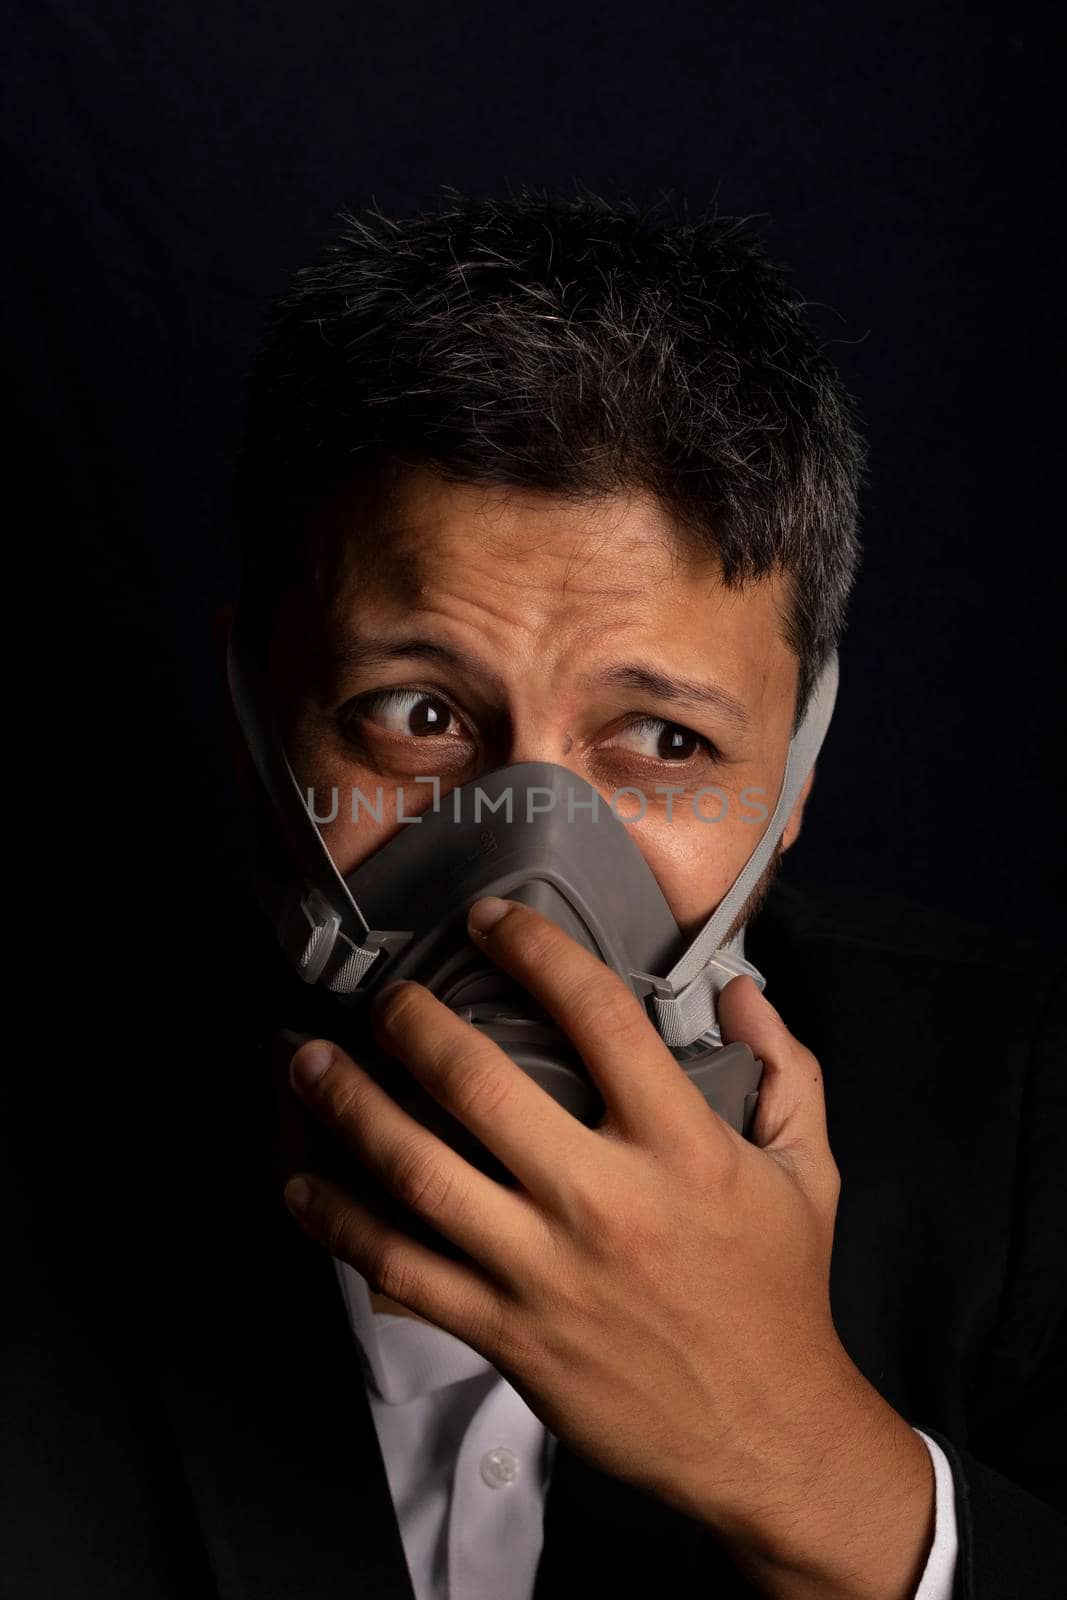 Young handsome with fear and industrial mask to prevent the spread of contagious viruses or chemical gases by eagg13